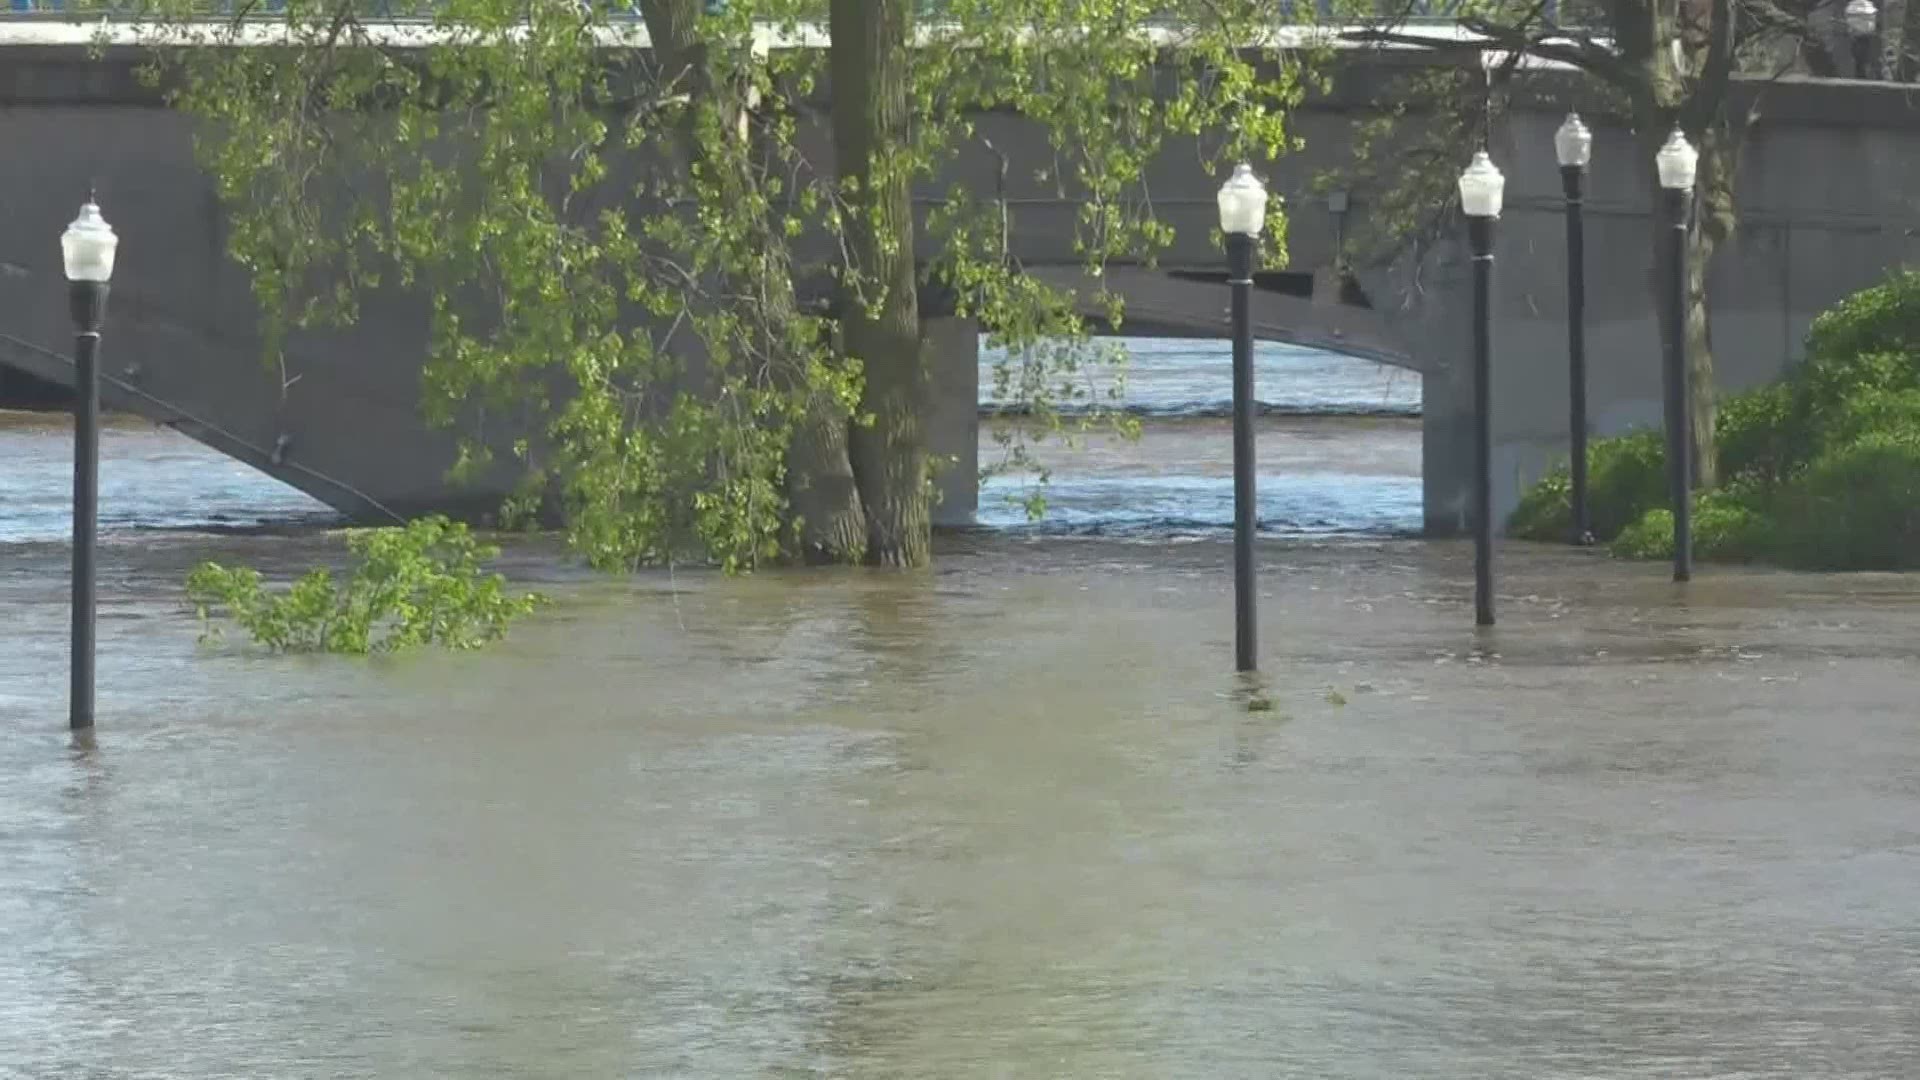 The National Weather Service says in some areas the water is about 10 feet higher than average.